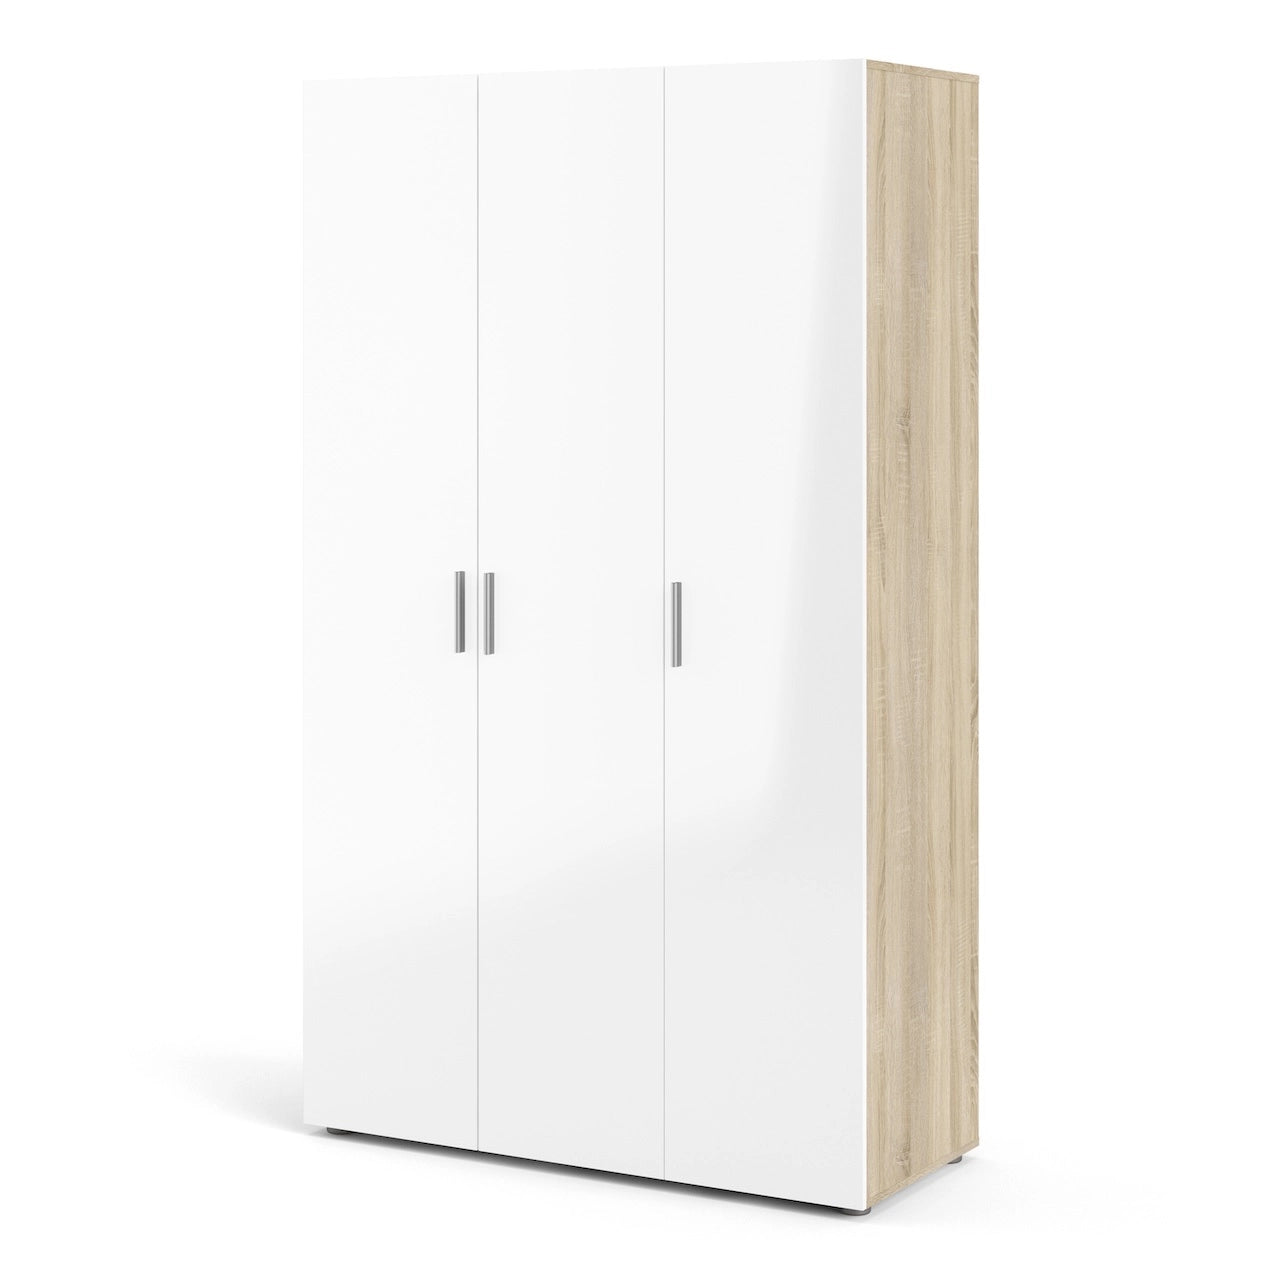 Furniture To Go Pepe Wardrobe with 3 Doors in Oak with White High Gloss